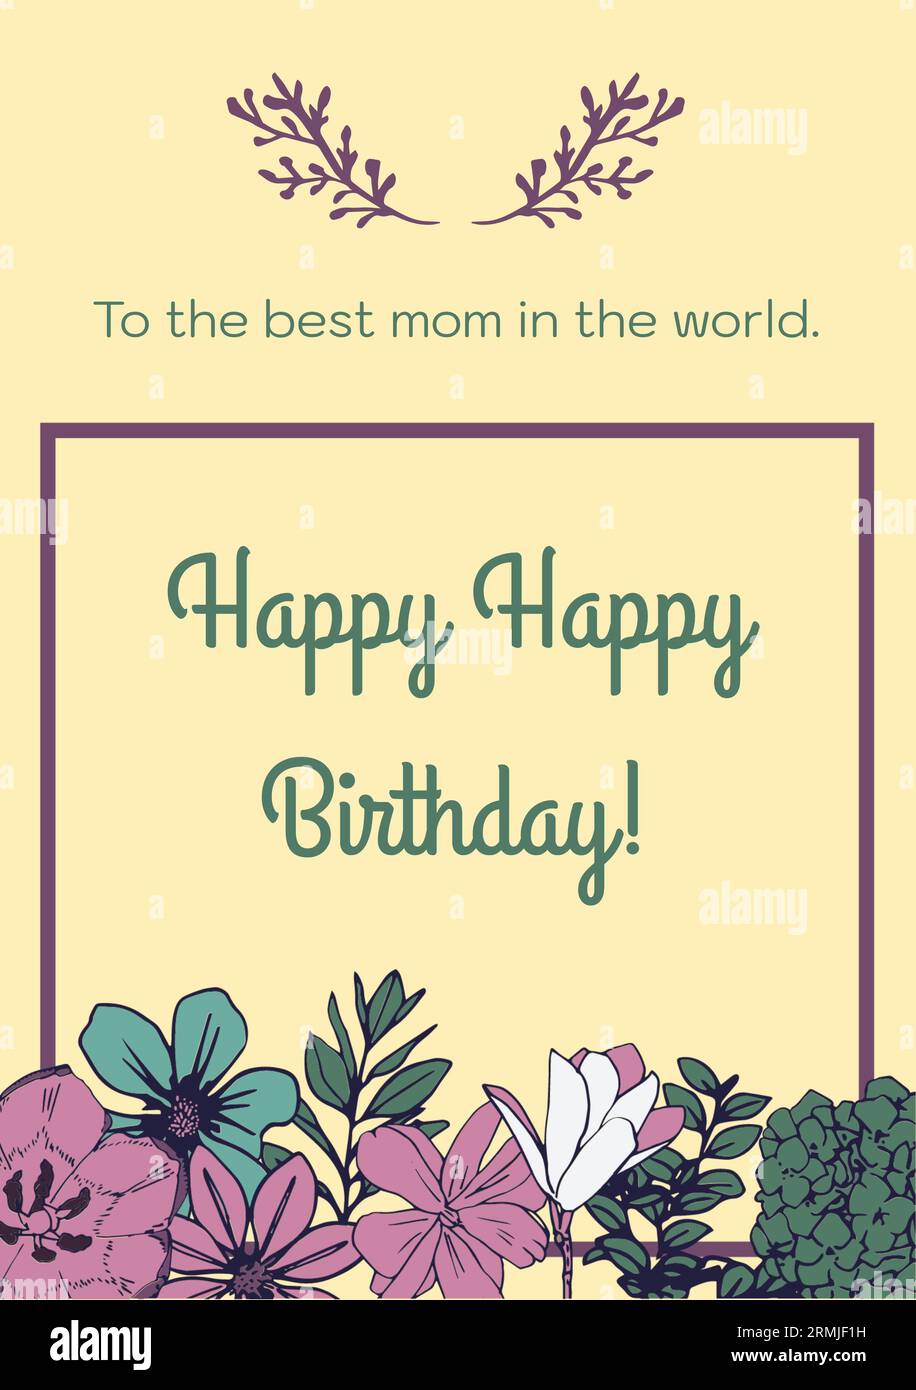 https://c8.alamy.com/comp/2RMJF1H/illustration-of-flowers-with-to-the-best-mom-in-the-world-and-happy-happy-birthday-text-copy-space-2RMJF1H.jpg